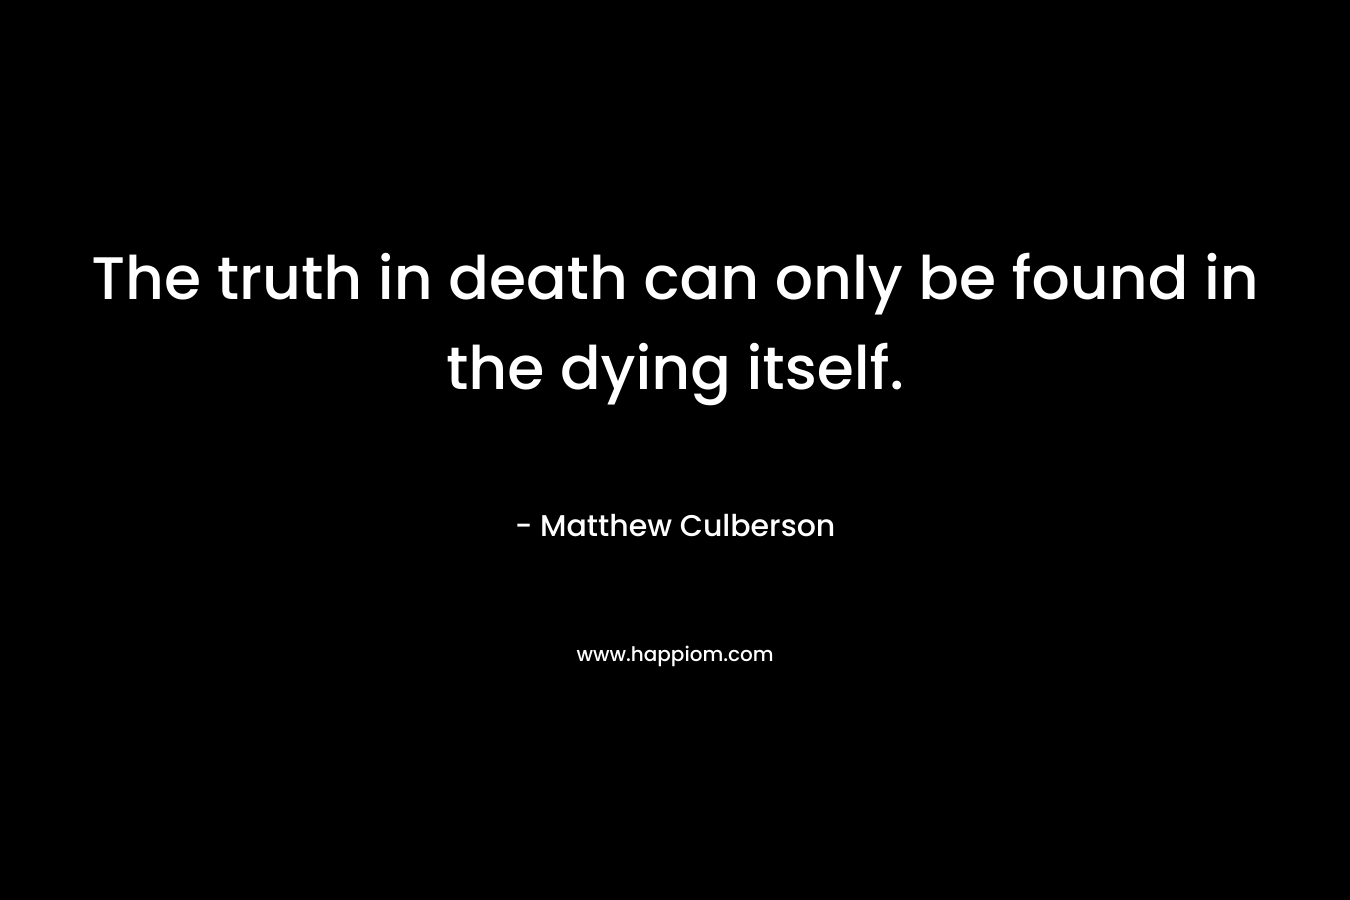 The truth in death can only be found in the dying itself. – Matthew Culberson